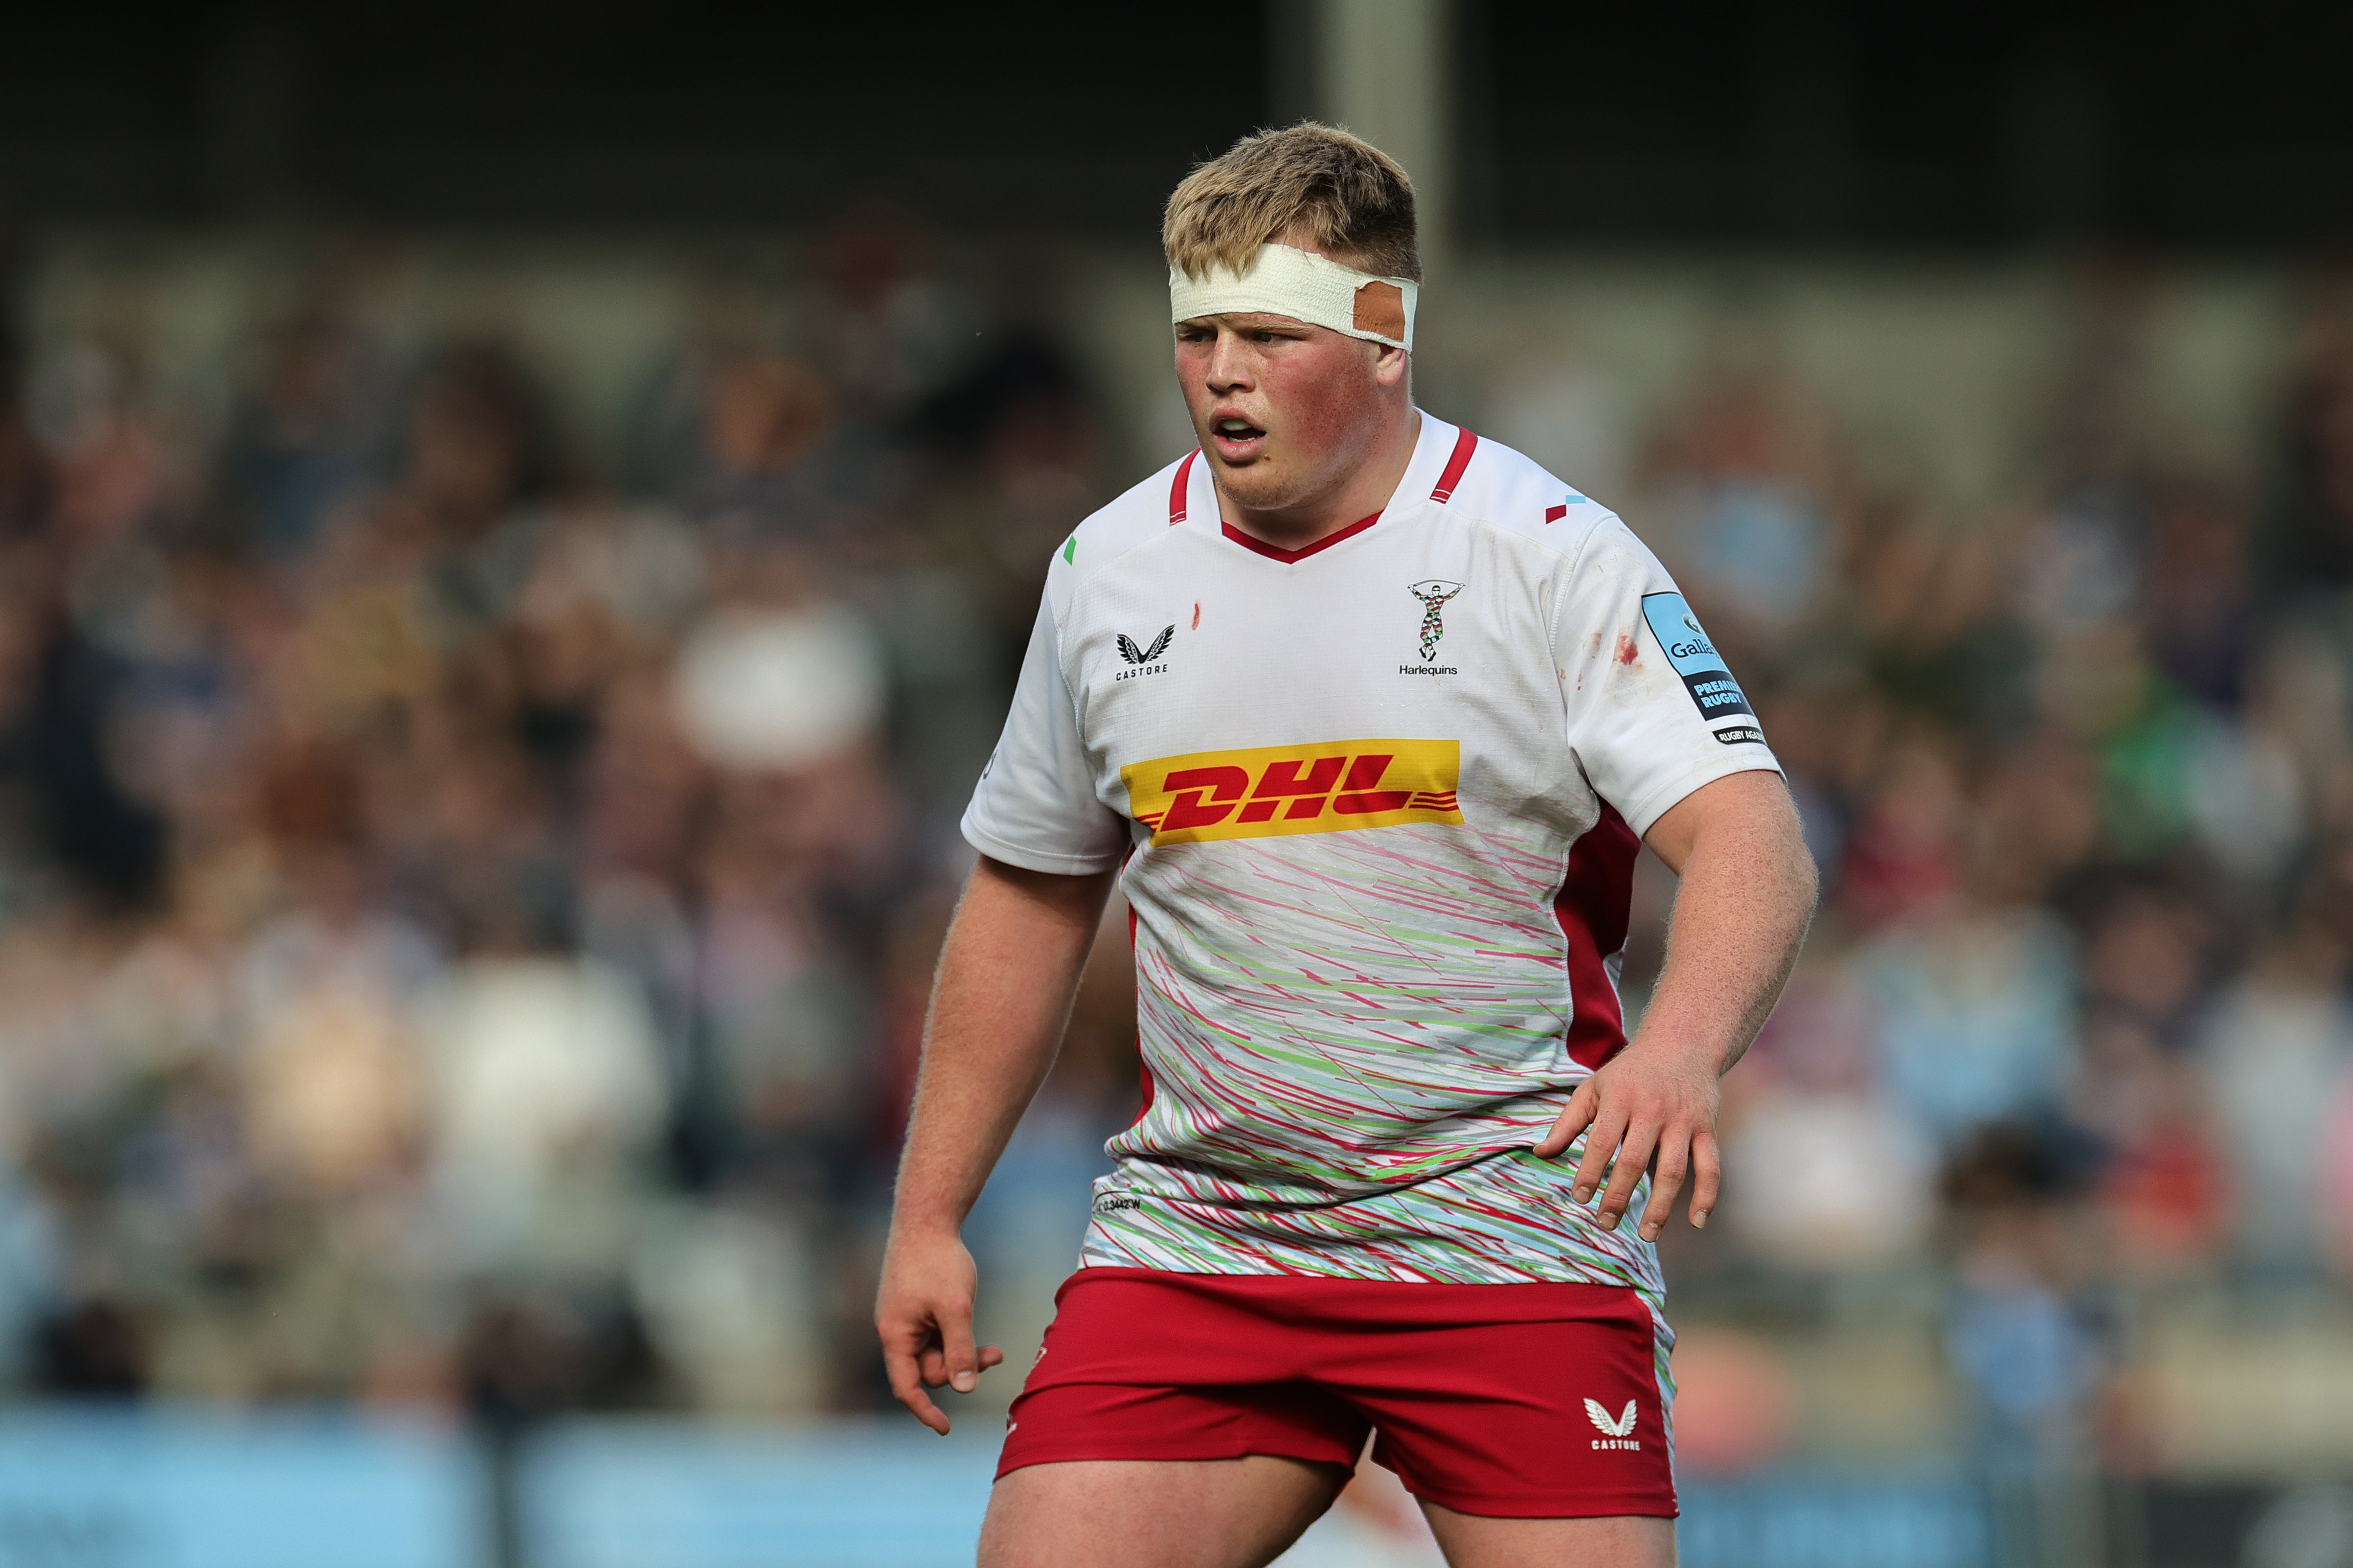 Harlequins youngster Fin Baxter has impressed this season